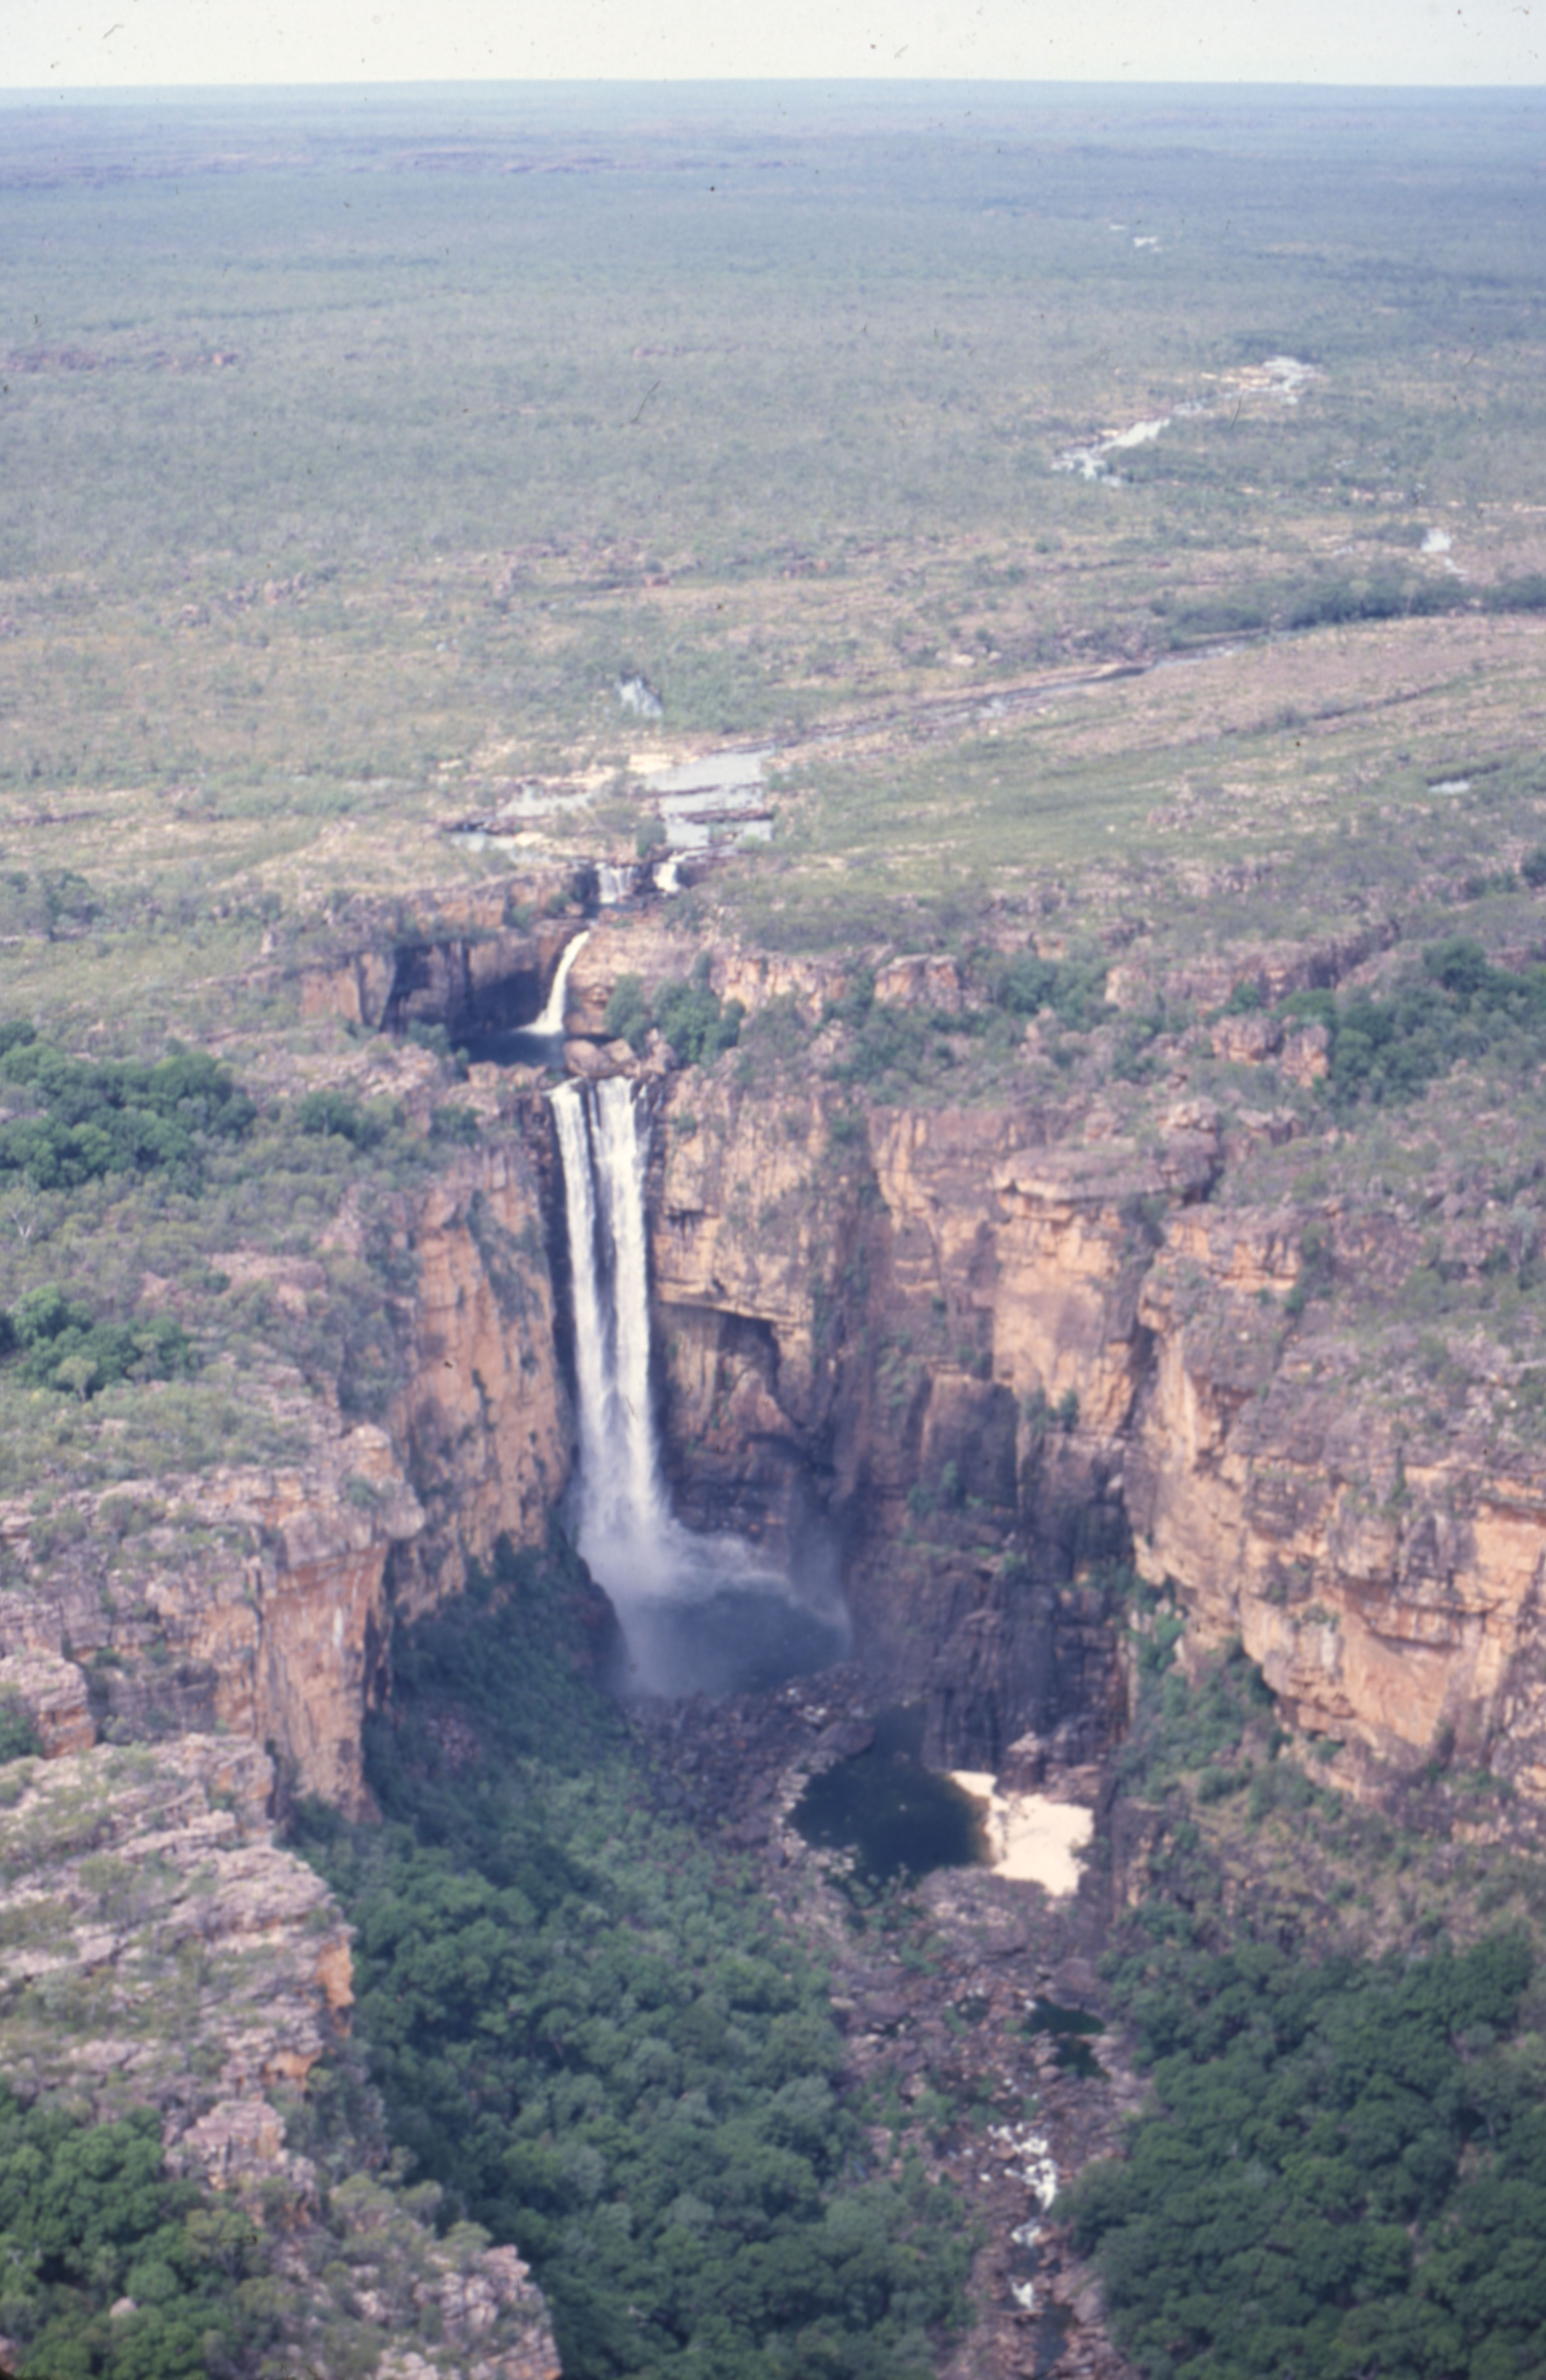 [Jim Jim Falls, Kakadu National Park, 6 April 1982]<br />Image courtesy of Northern Territory Archives Service, Department of Chief Minister, NTRS 3822 P2, Box 13 Slide 1.